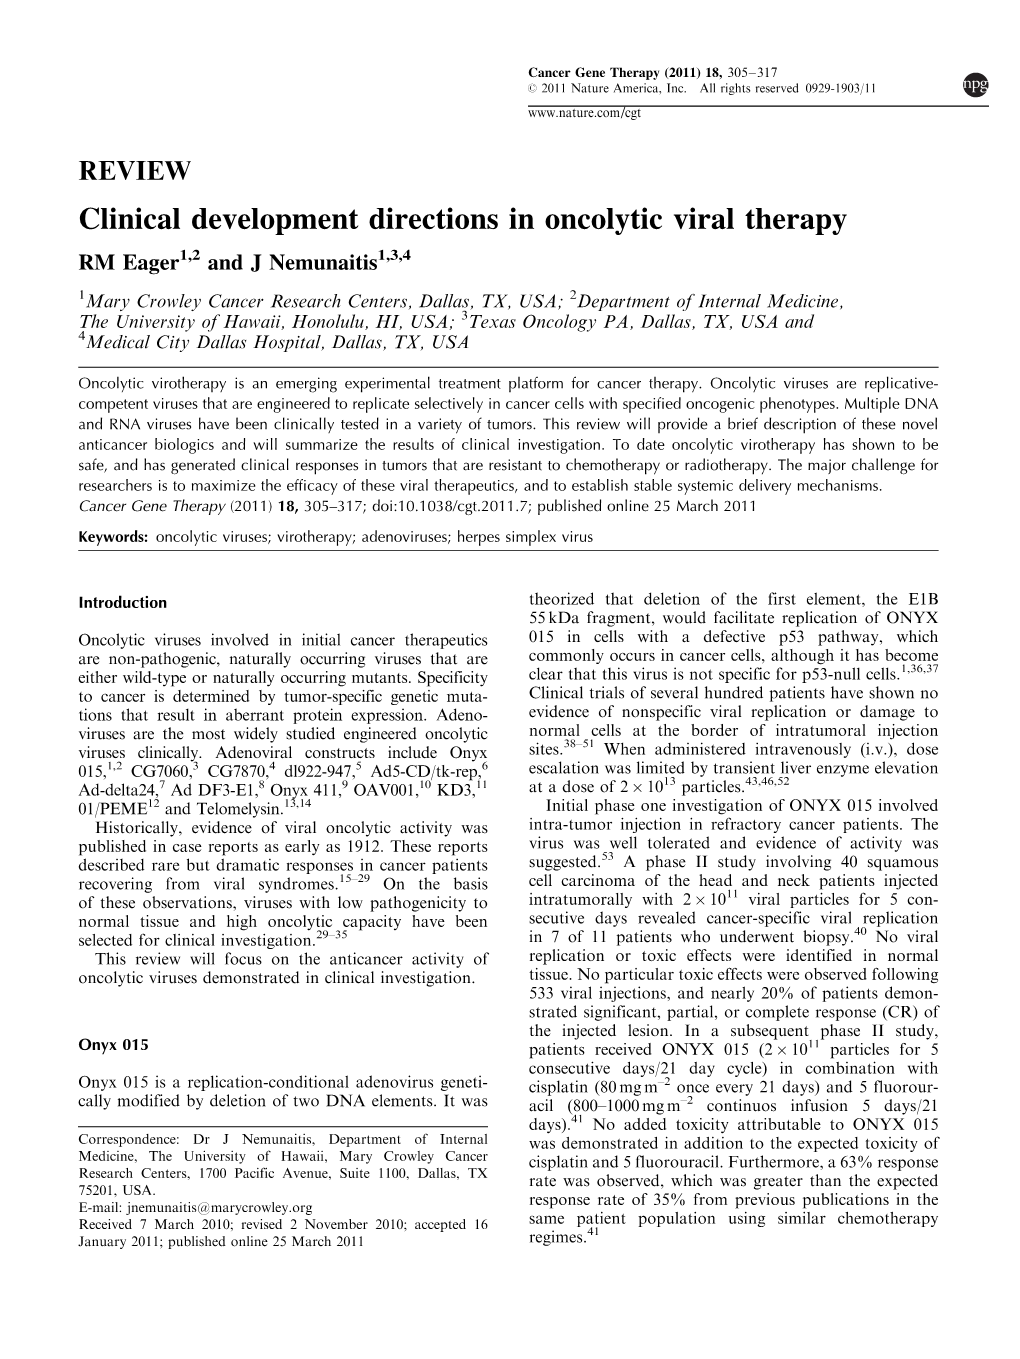 Clinical Development Directions in Oncolytic Viral Therapy